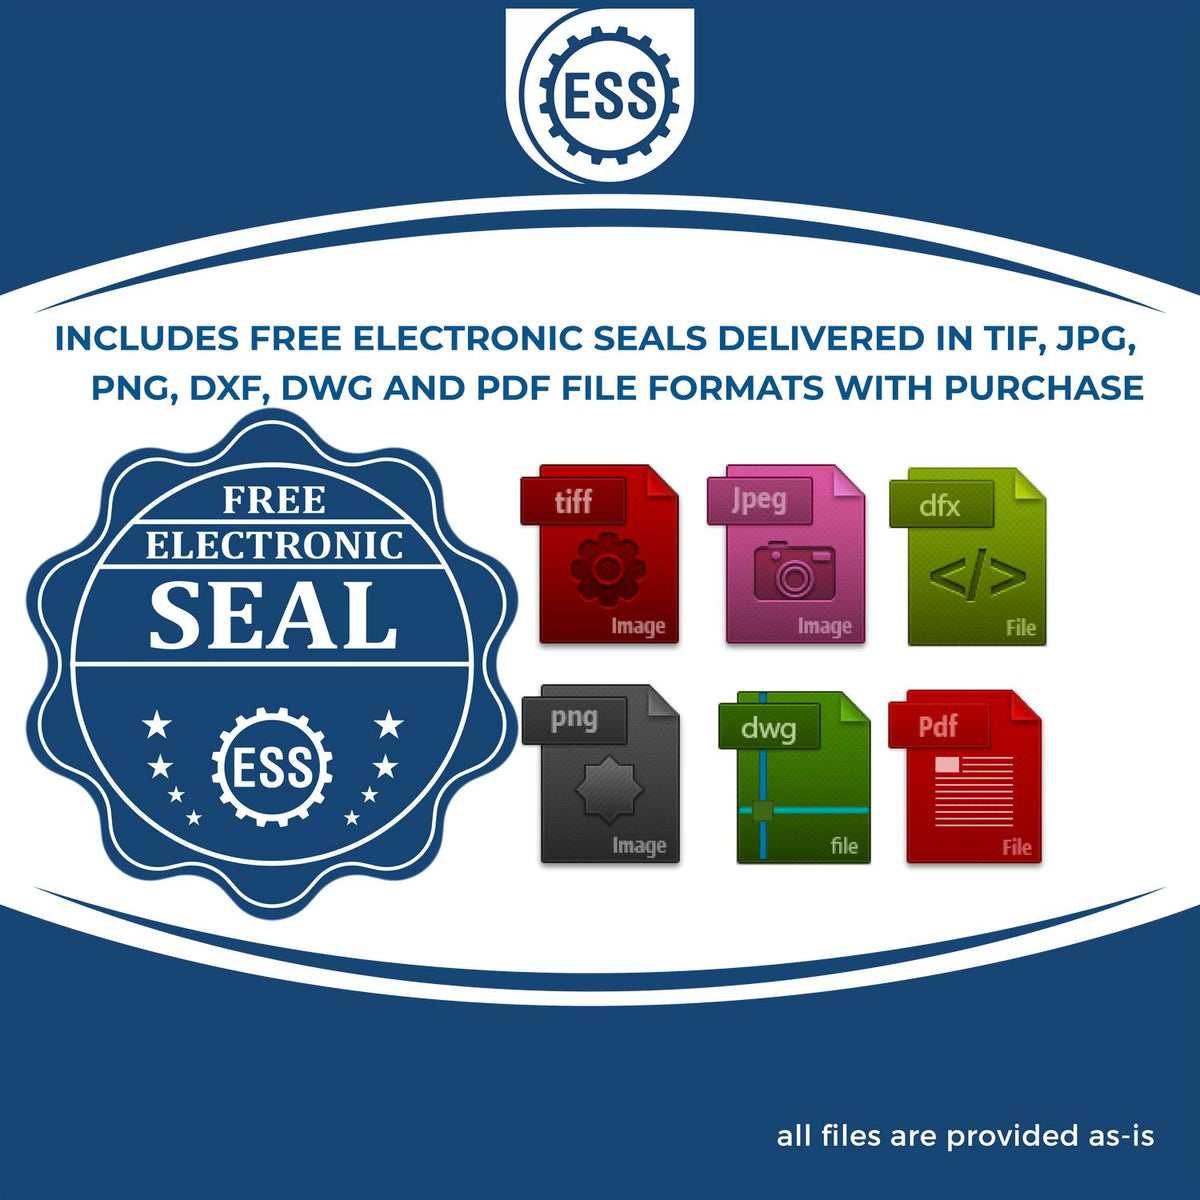 An infographic for the free electronic seal for the Long Reach Mississippi PE Seal illustrating the different file type icons such as DXF, DWG, TIF, JPG and PNG.